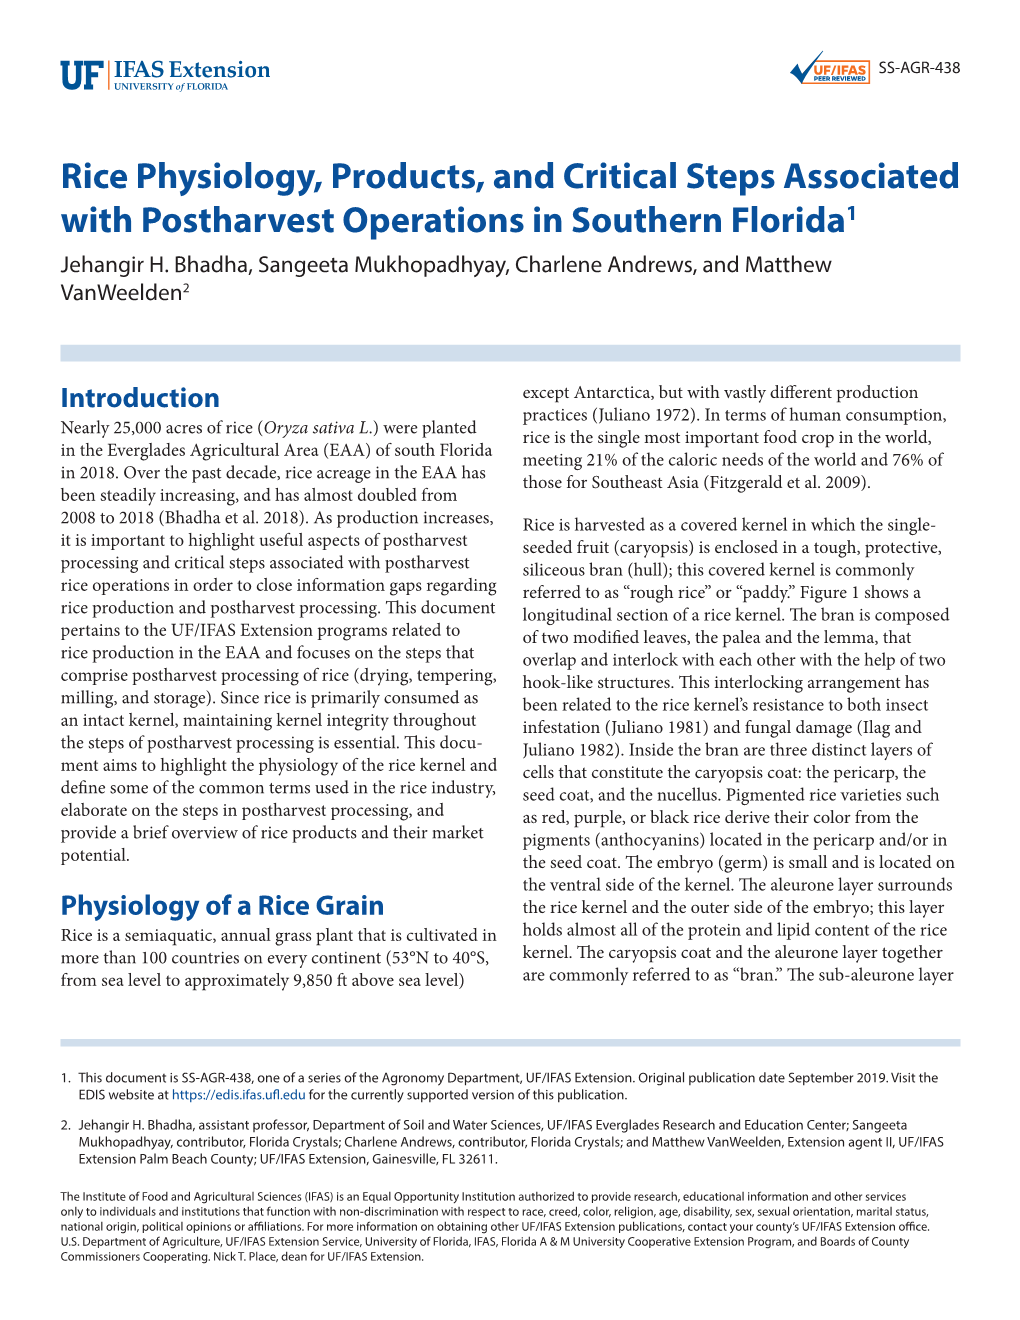 Rice Physiology, Products, and Critical Steps Associated with Postharvest Operations in Southern Florida1 Jehangir H